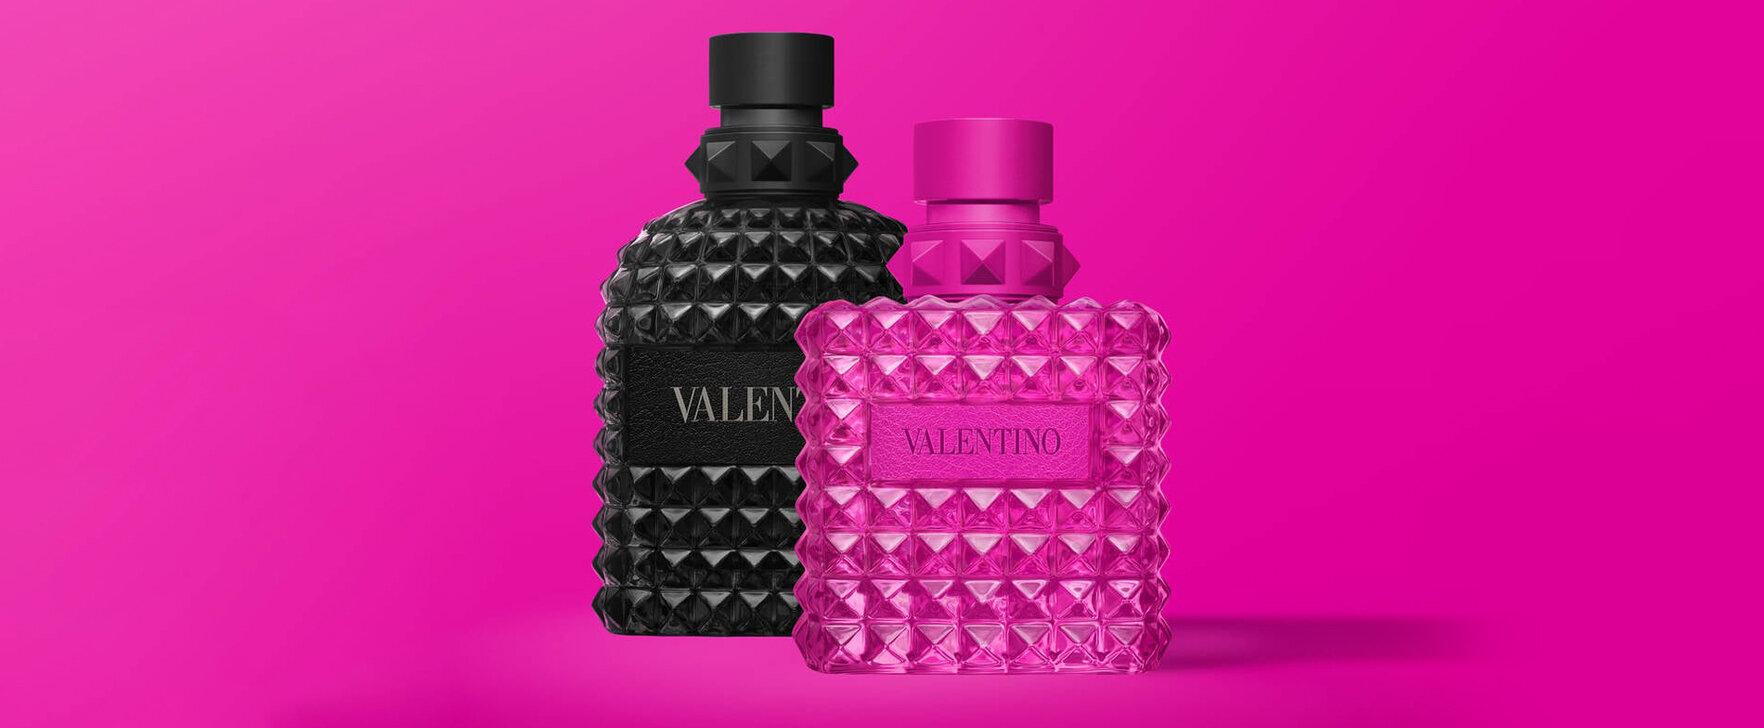 Valentino Donna Born in Roma Pink PP, Valentino Uomo Born in Roma Rockstud Noir: The New Limited Edition Fragrance Duo From Valentino